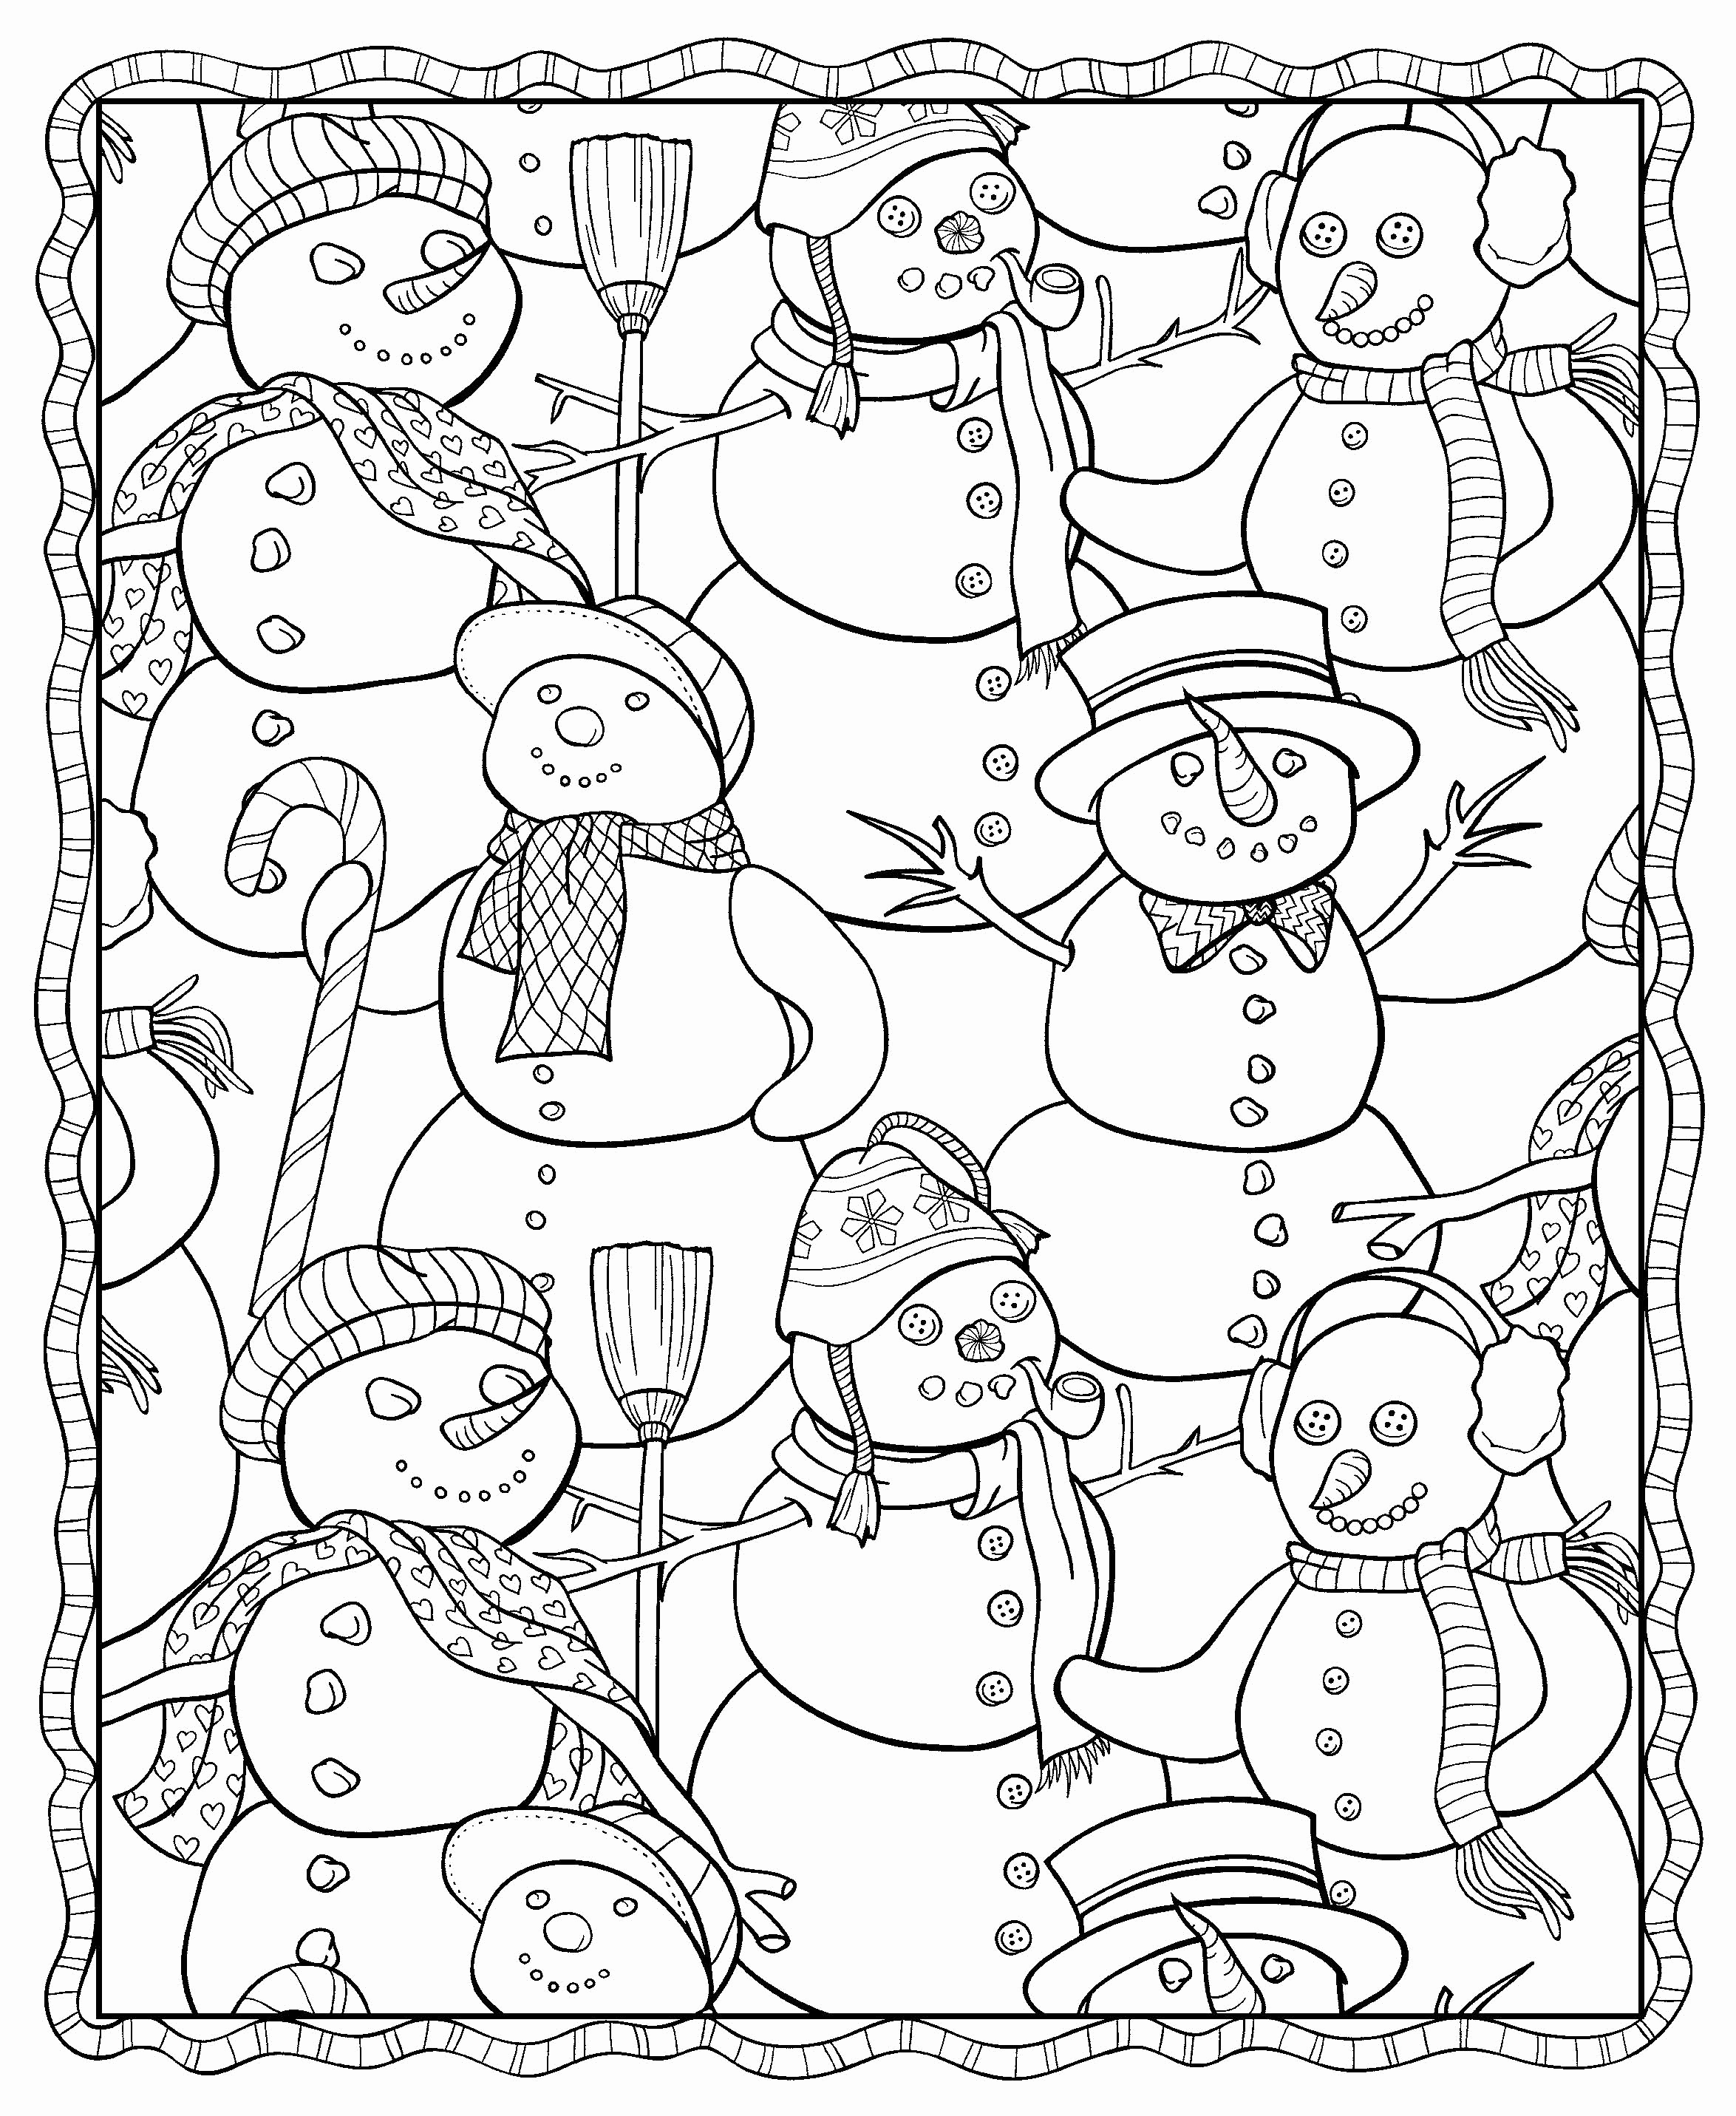 Grayscale Coloring Pages To Print at GetDrawings.com | Free for